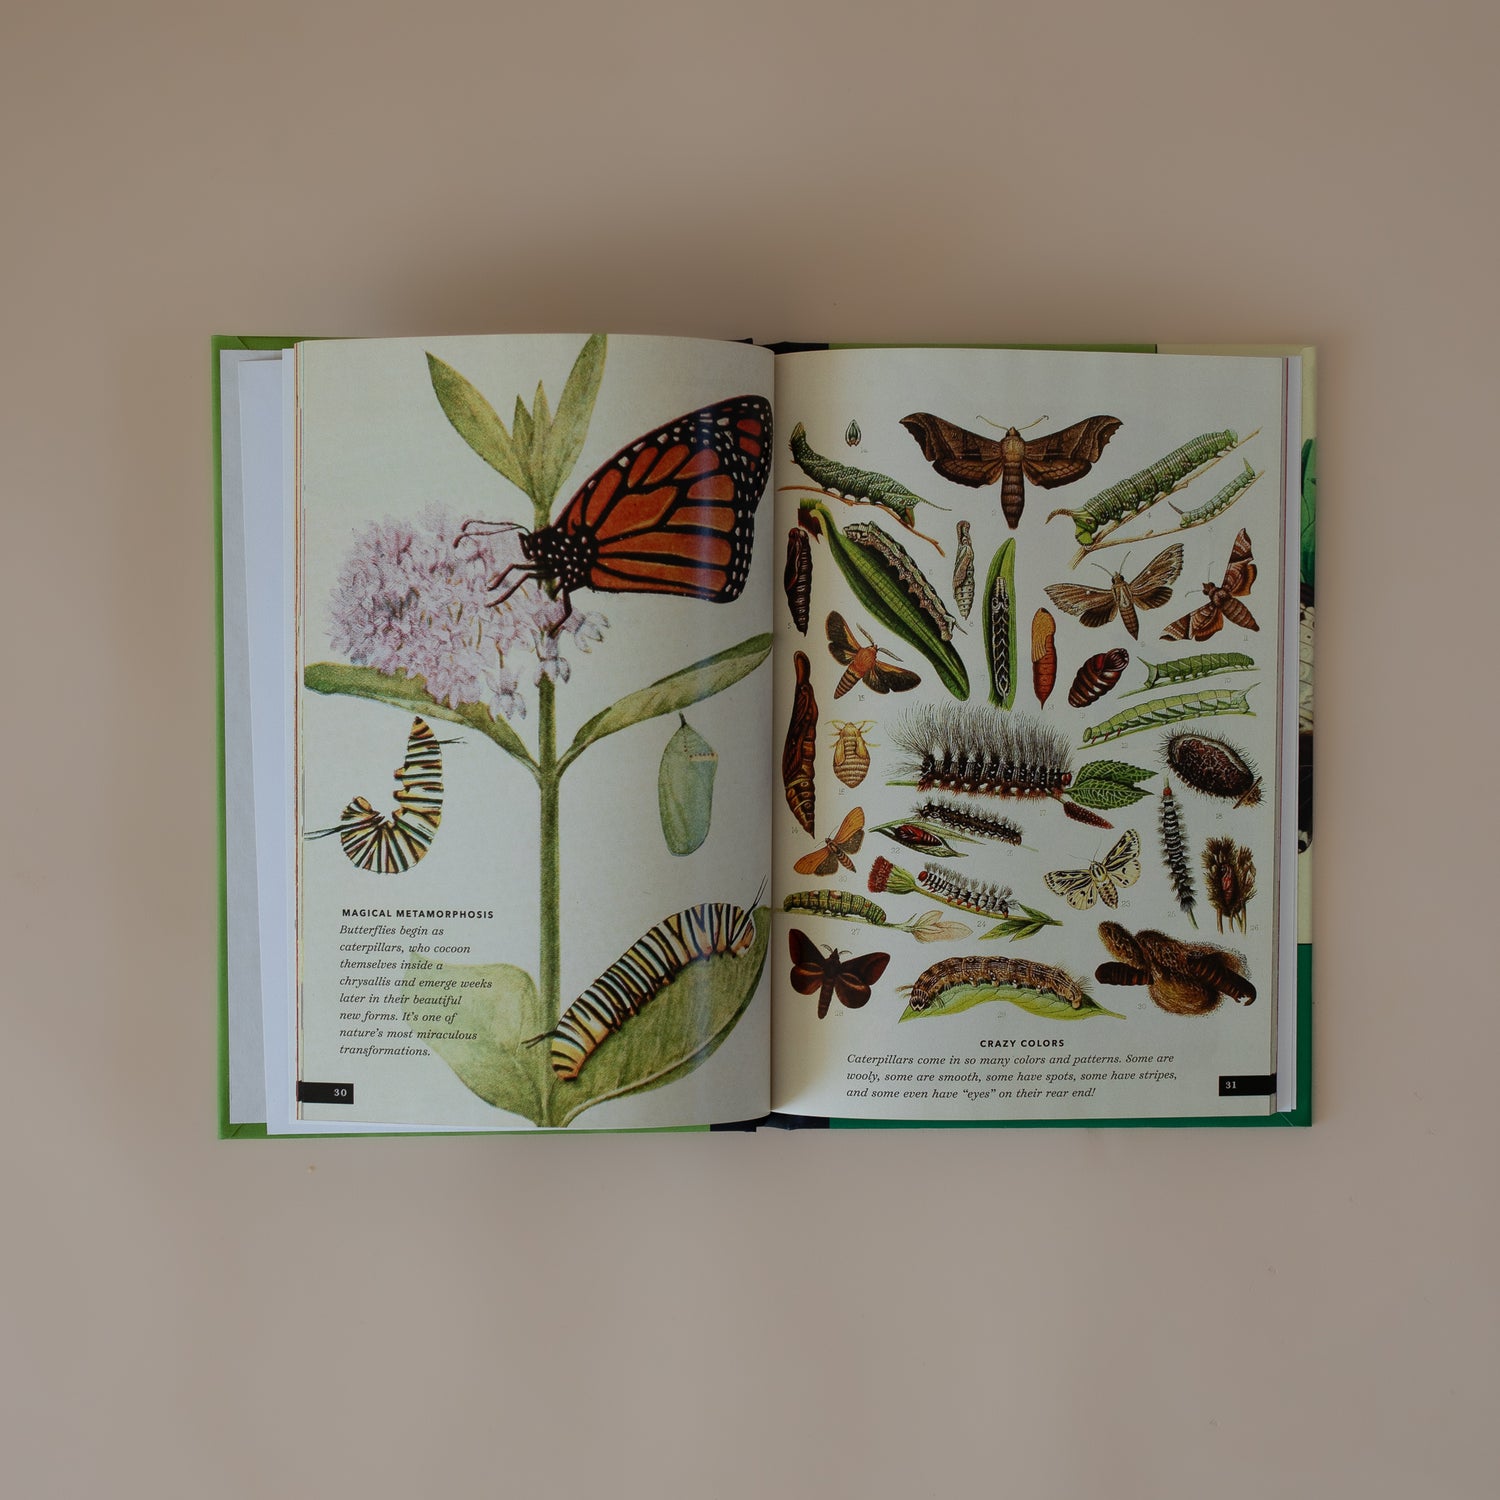 The Little Book Of Insects